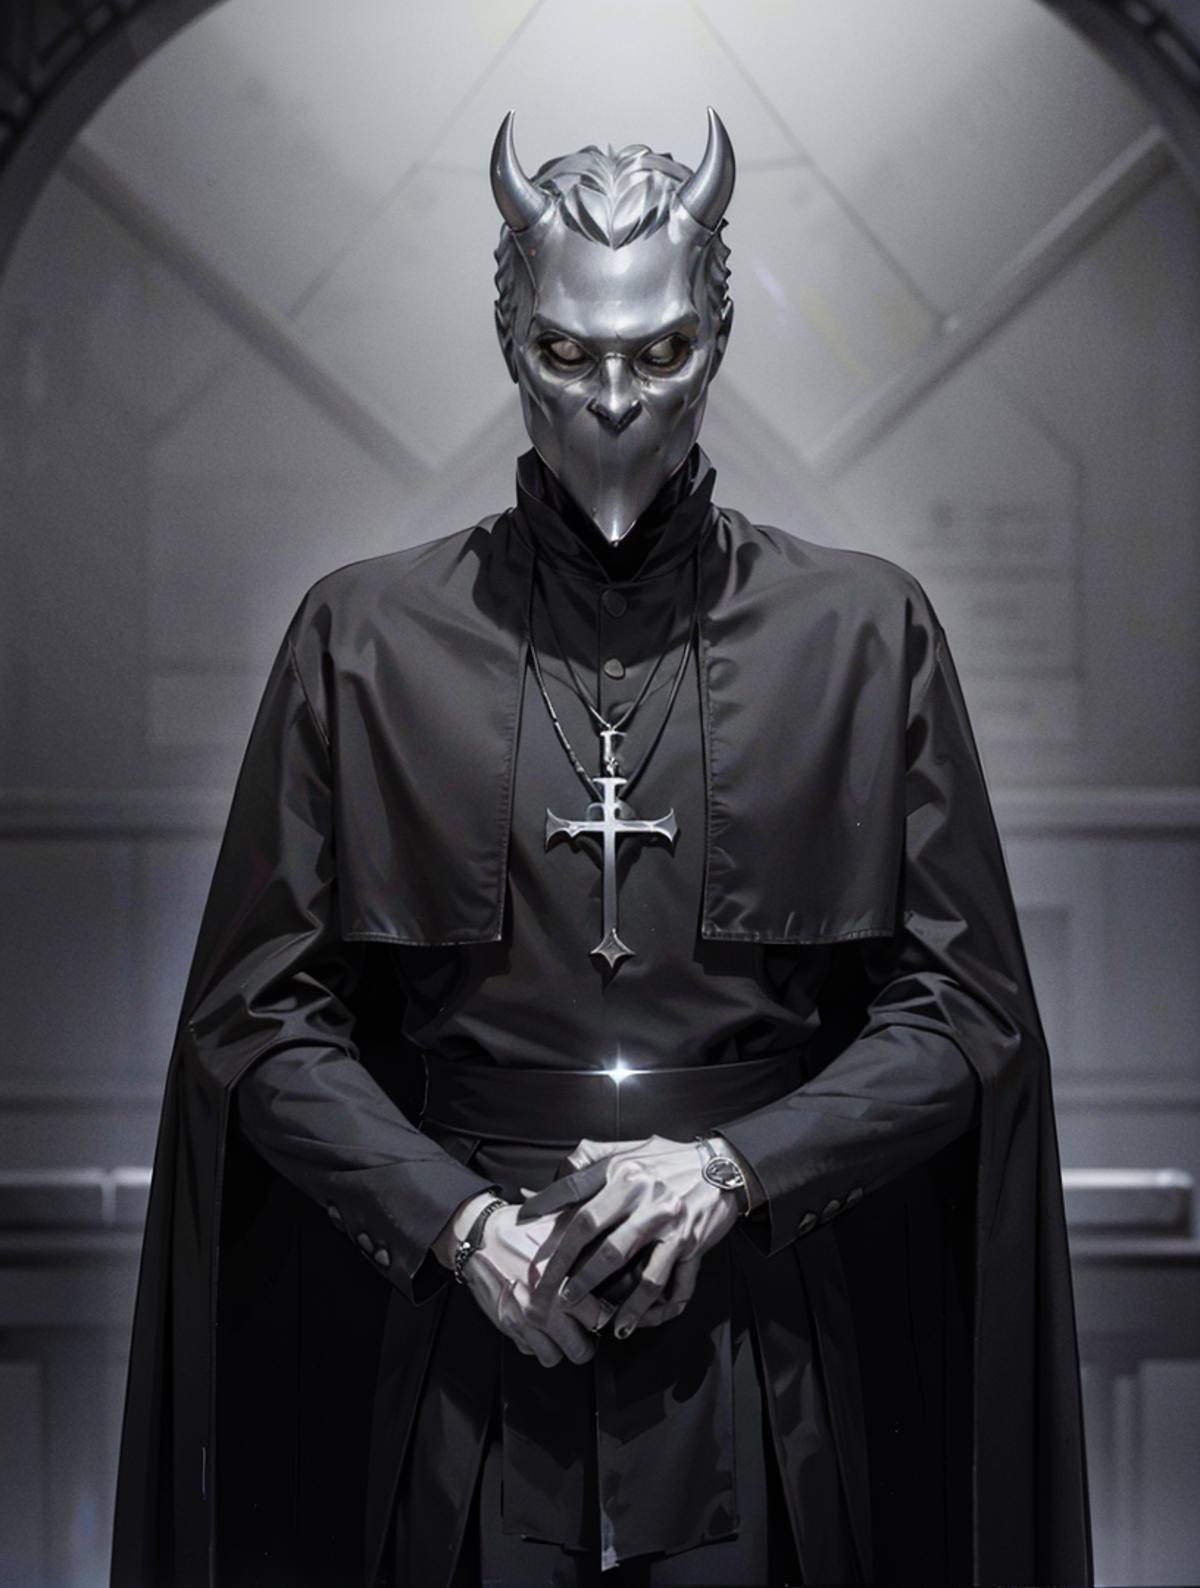 Ghost | Nameless Ghoul image by Vovaldi